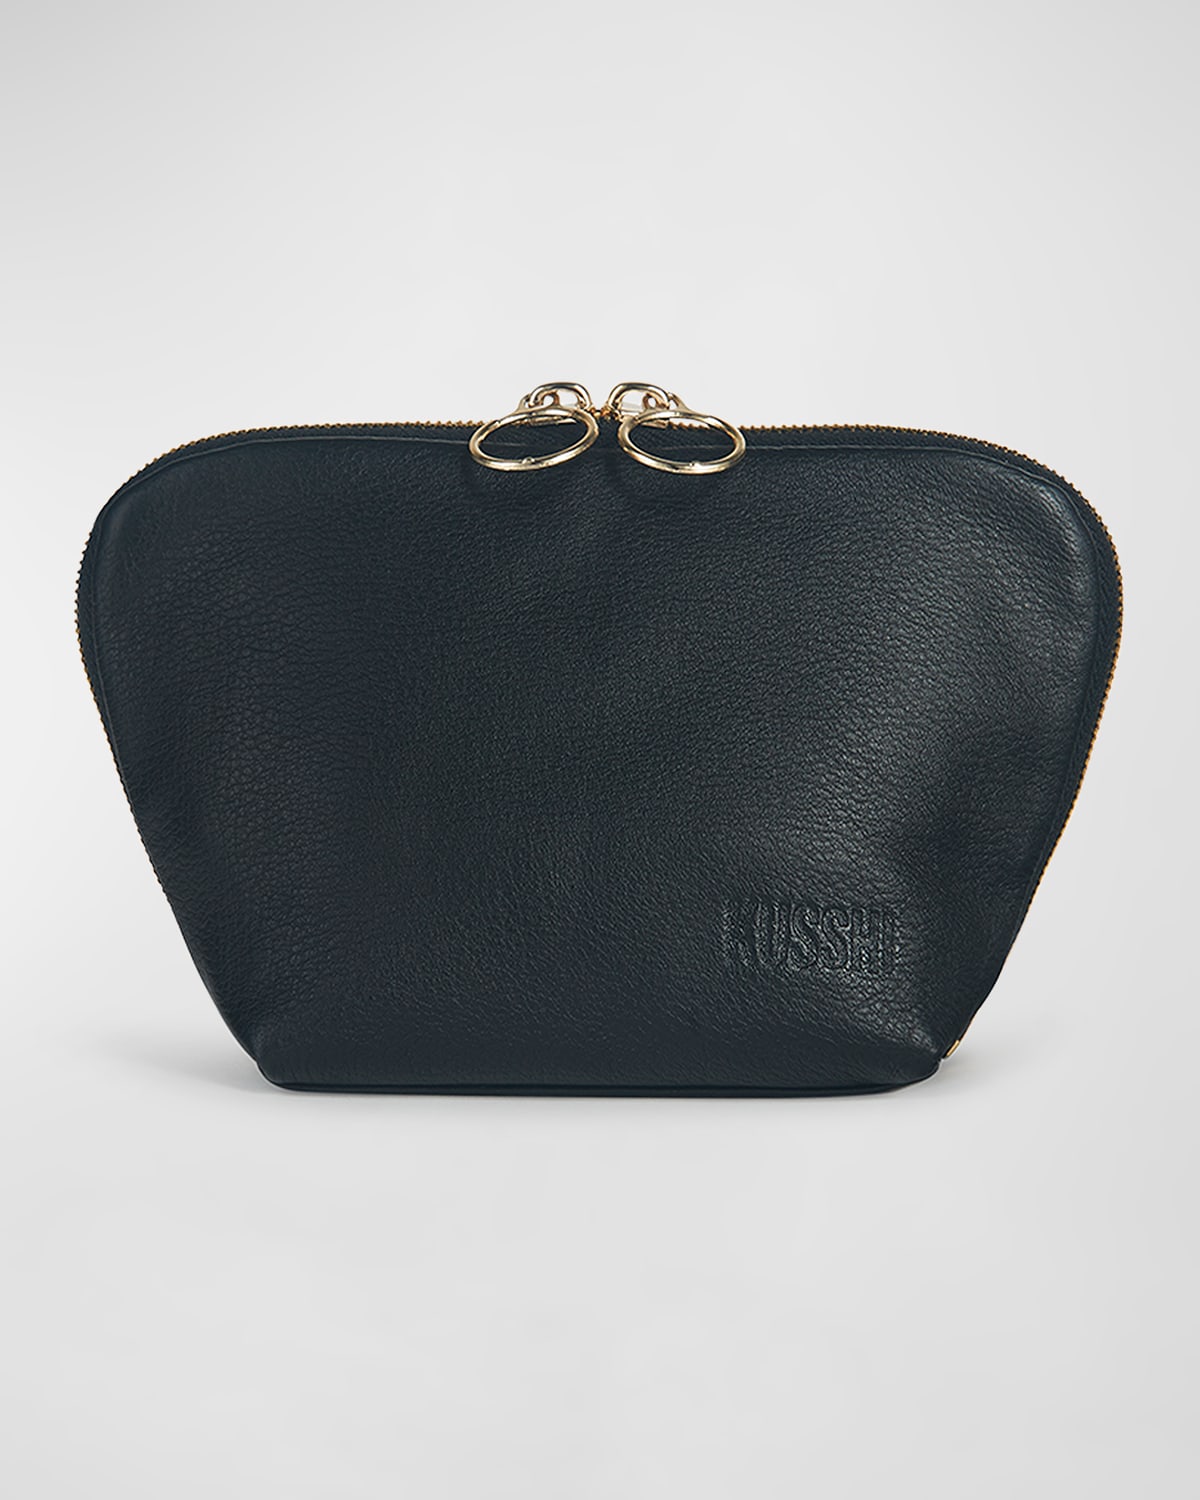 Kusshi Everyday Leather Makeup Bag In Blk/emerald Green